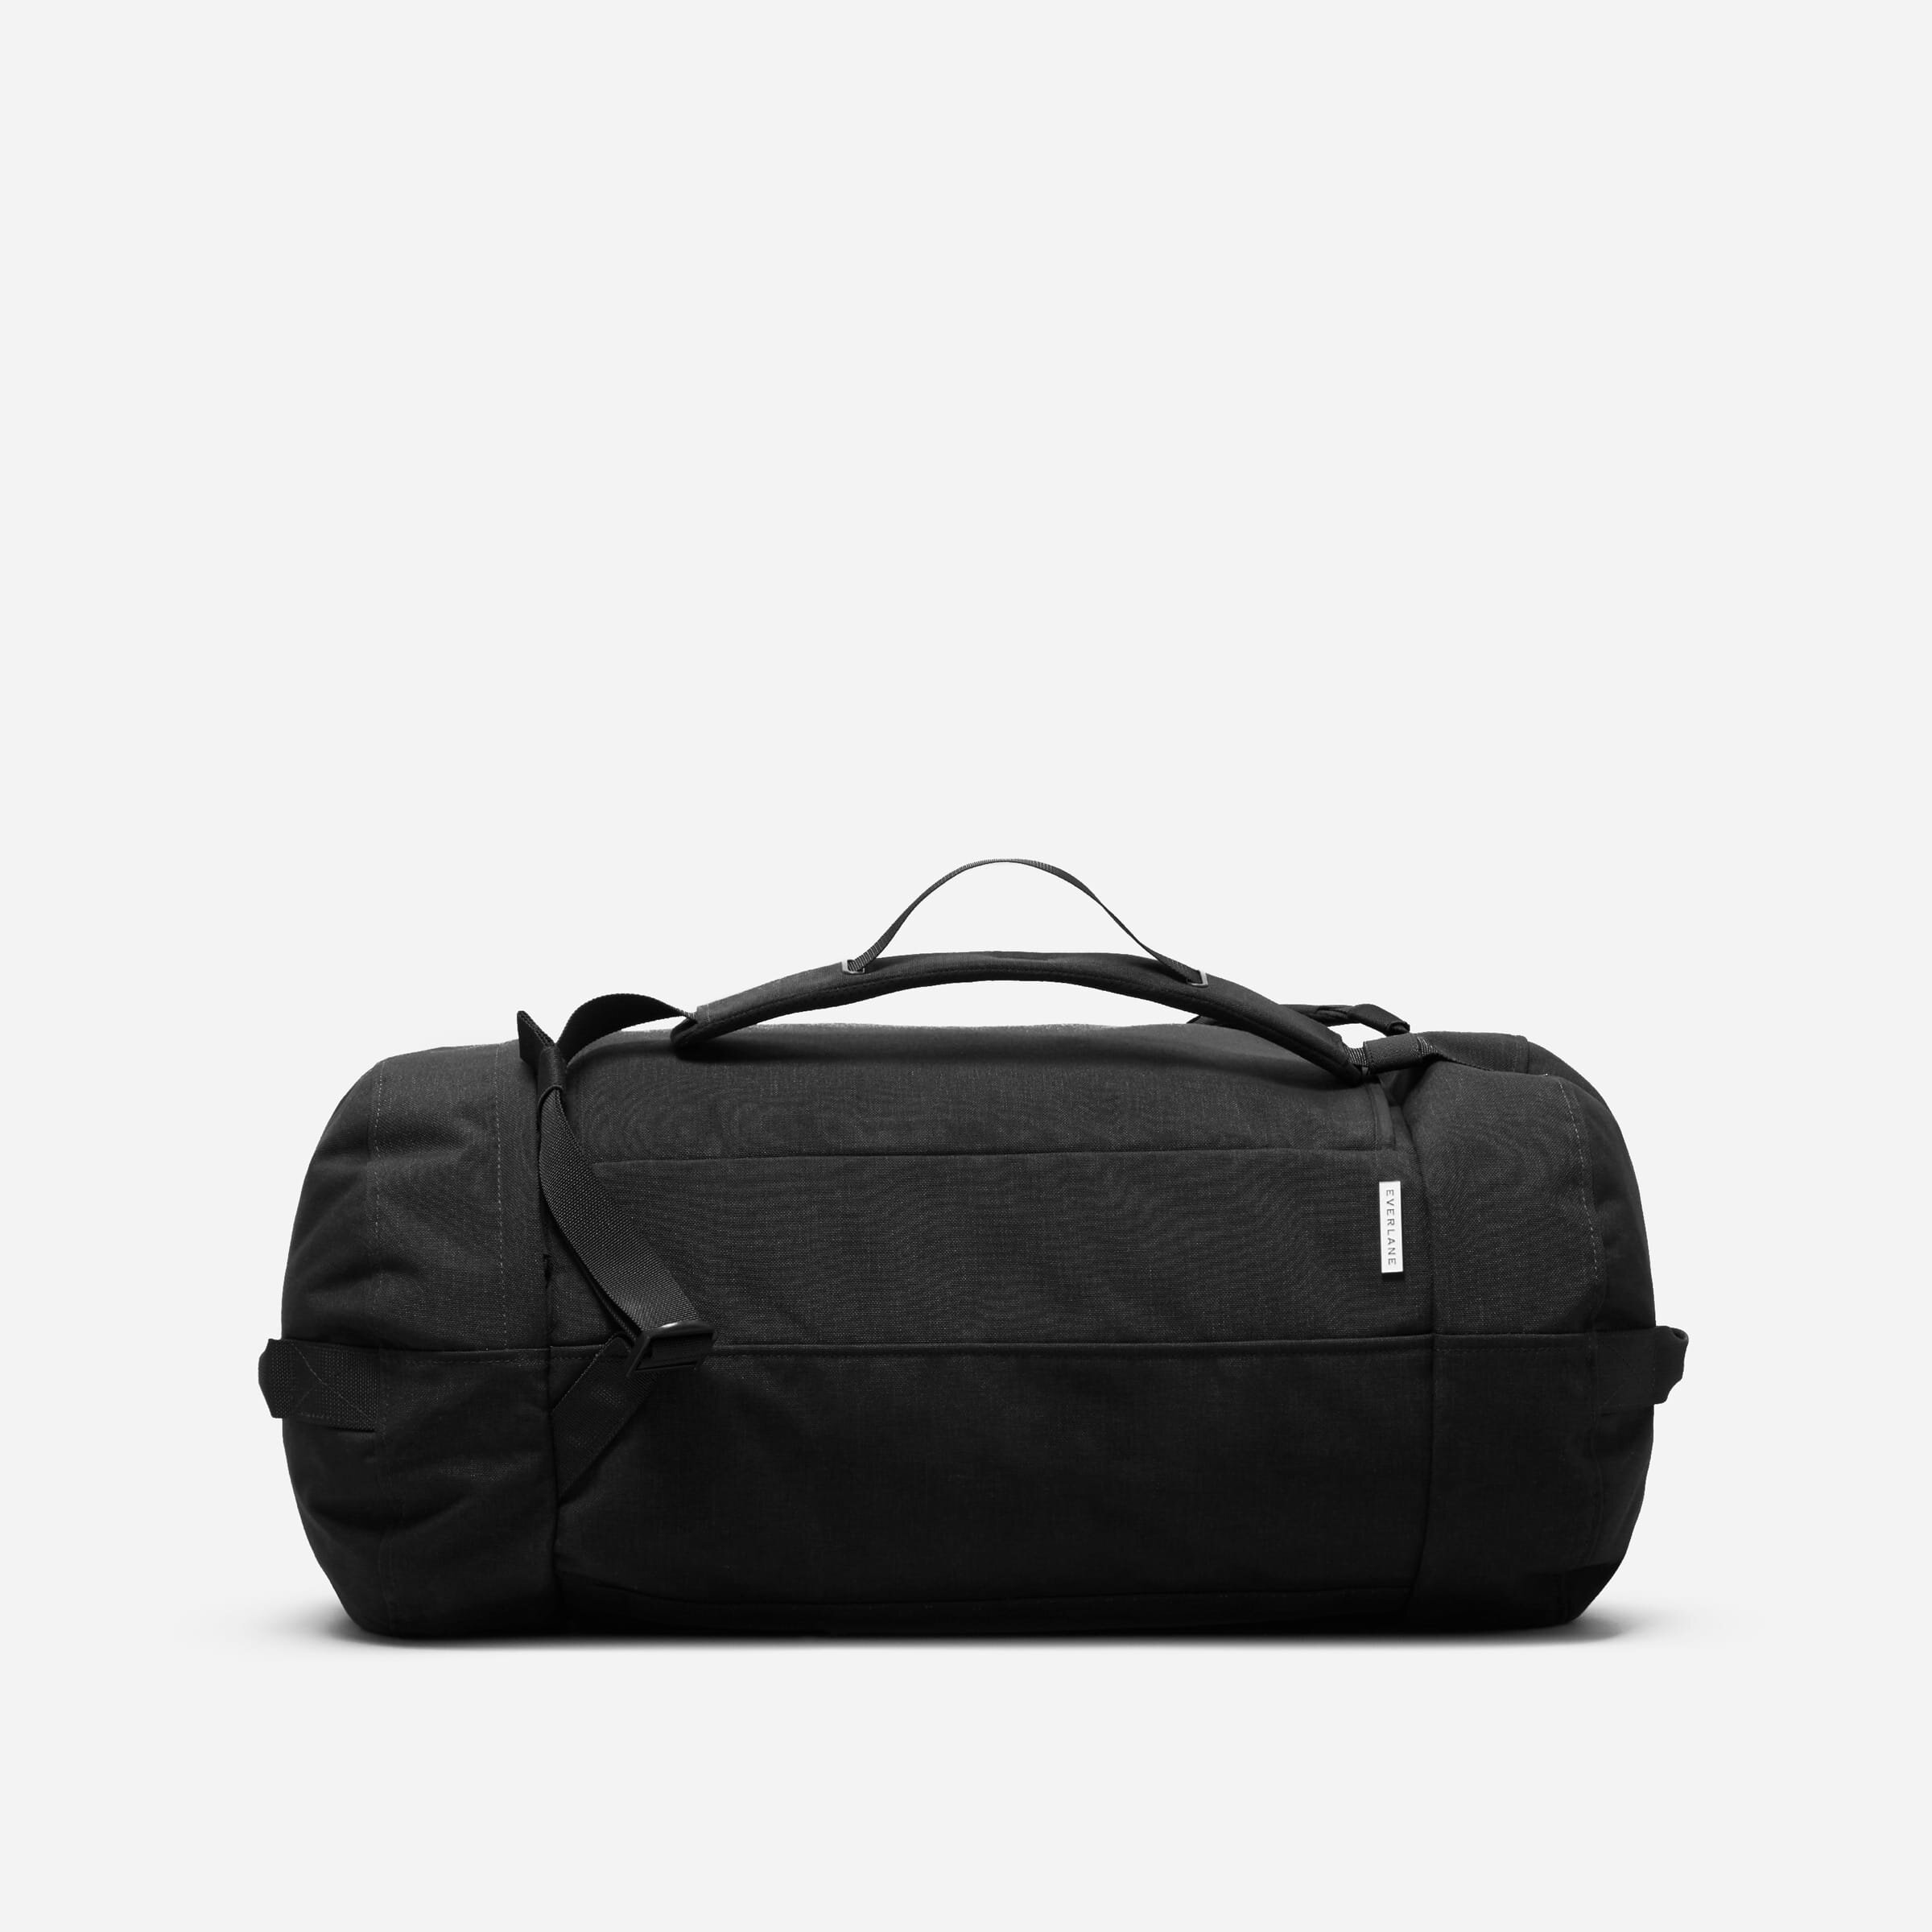   The mover pack  - Everlane 